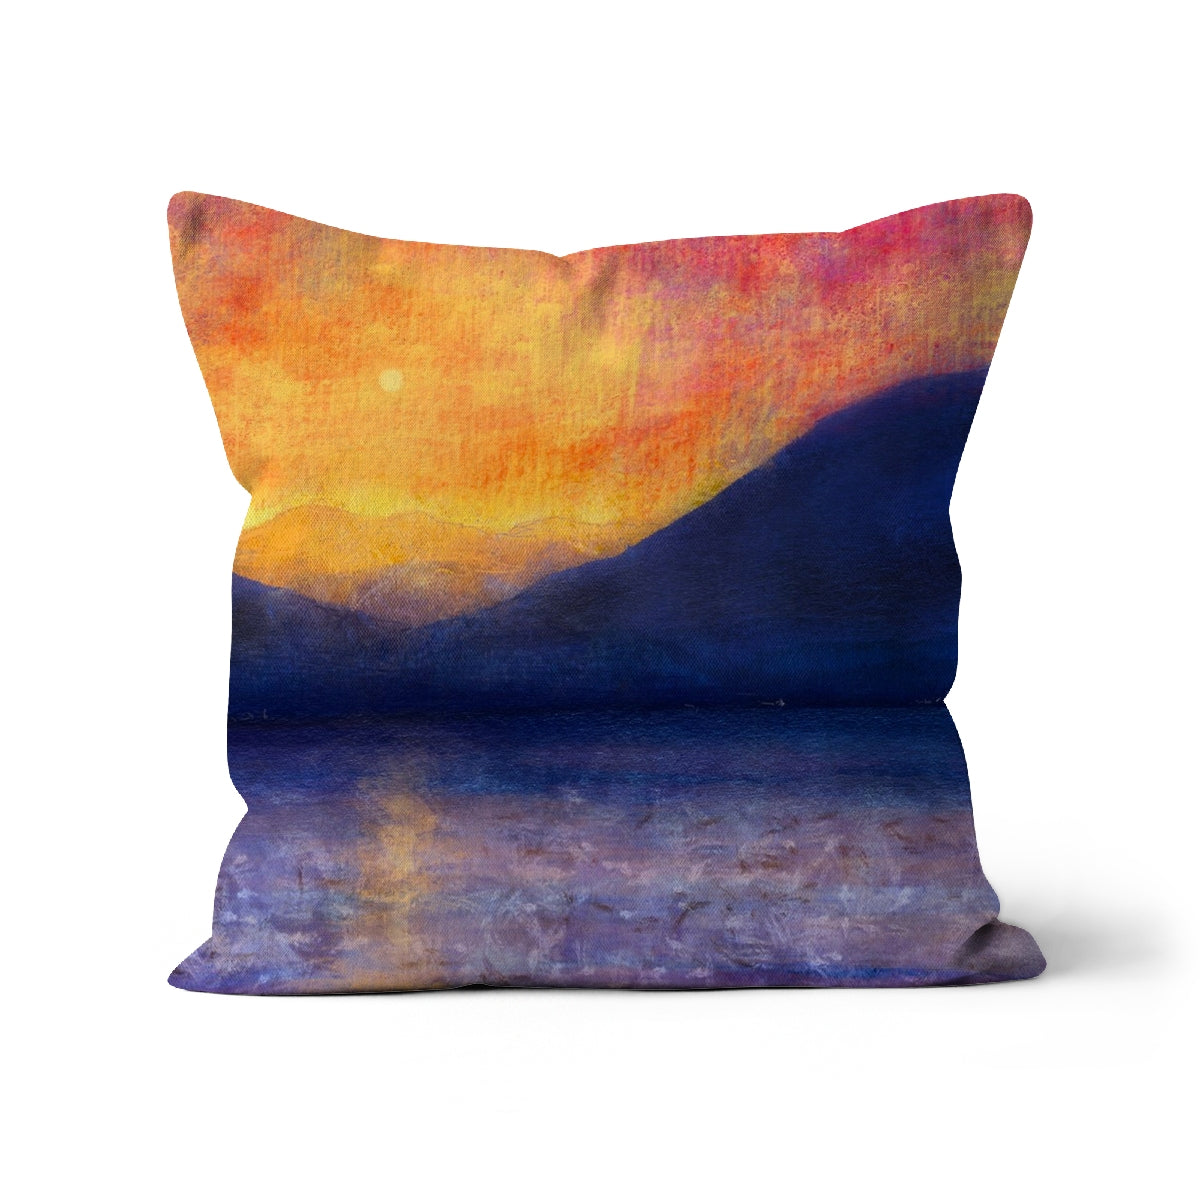 Sunset Approaching Mull Art Gifts Cushion-Cushions-Hebridean Islands Art Gallery-Canvas-12"x12"-Paintings, Prints, Homeware, Art Gifts From Scotland By Scottish Artist Kevin Hunter